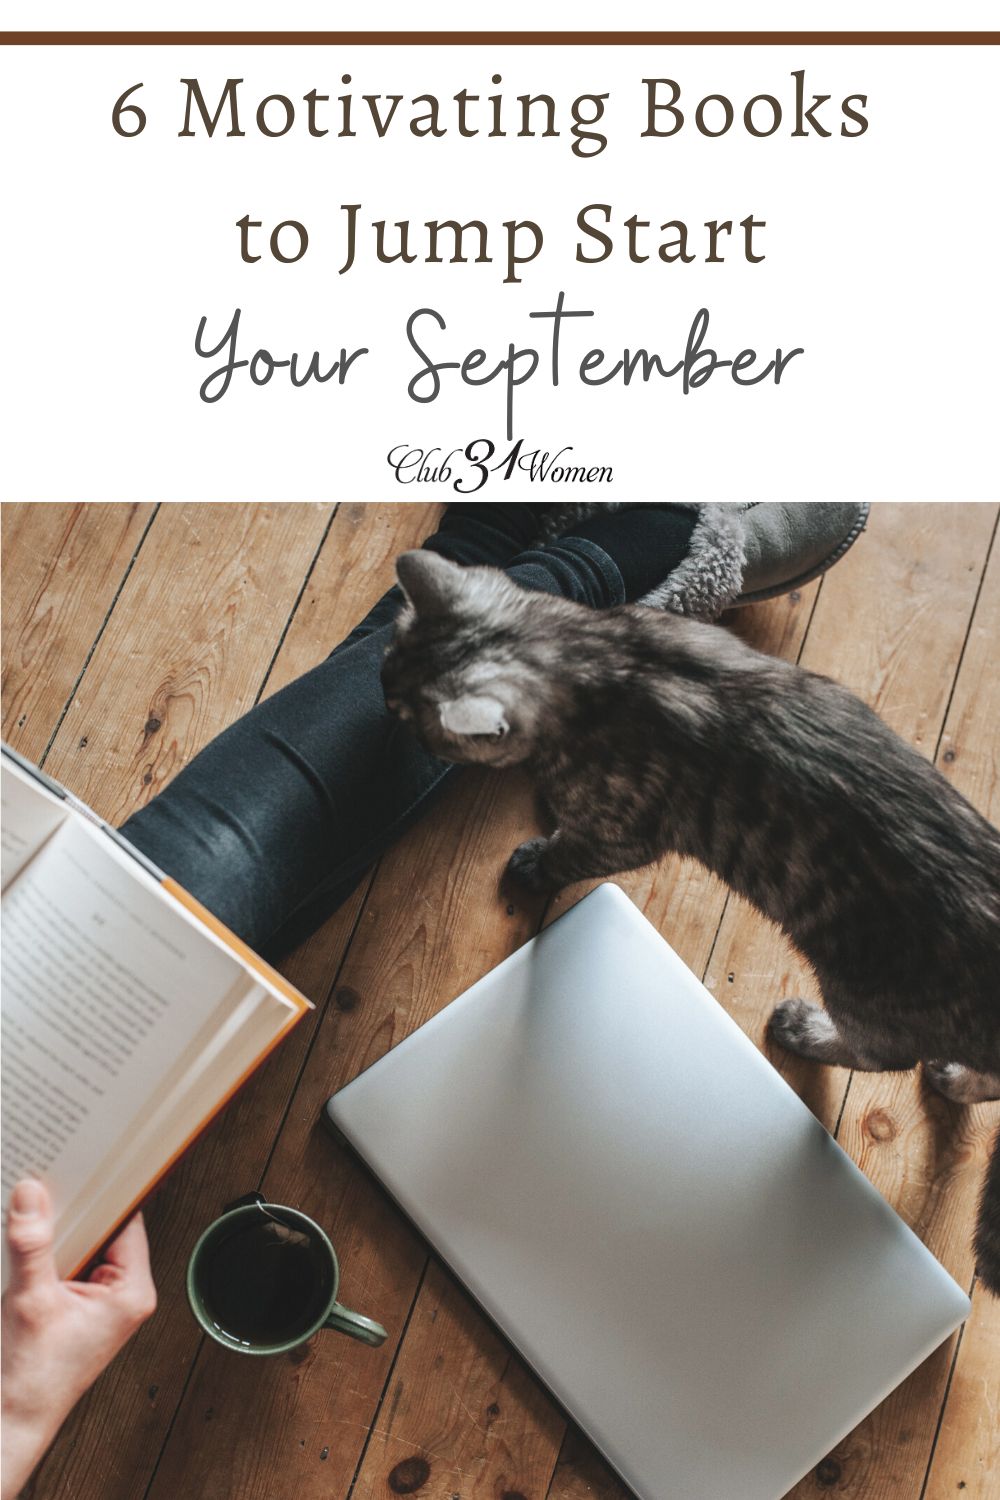 Does the change of season have you dragging your feet? Here are 7 wonderfully motivating titles to give you a jump-start on autumn this year! via @Club31Women